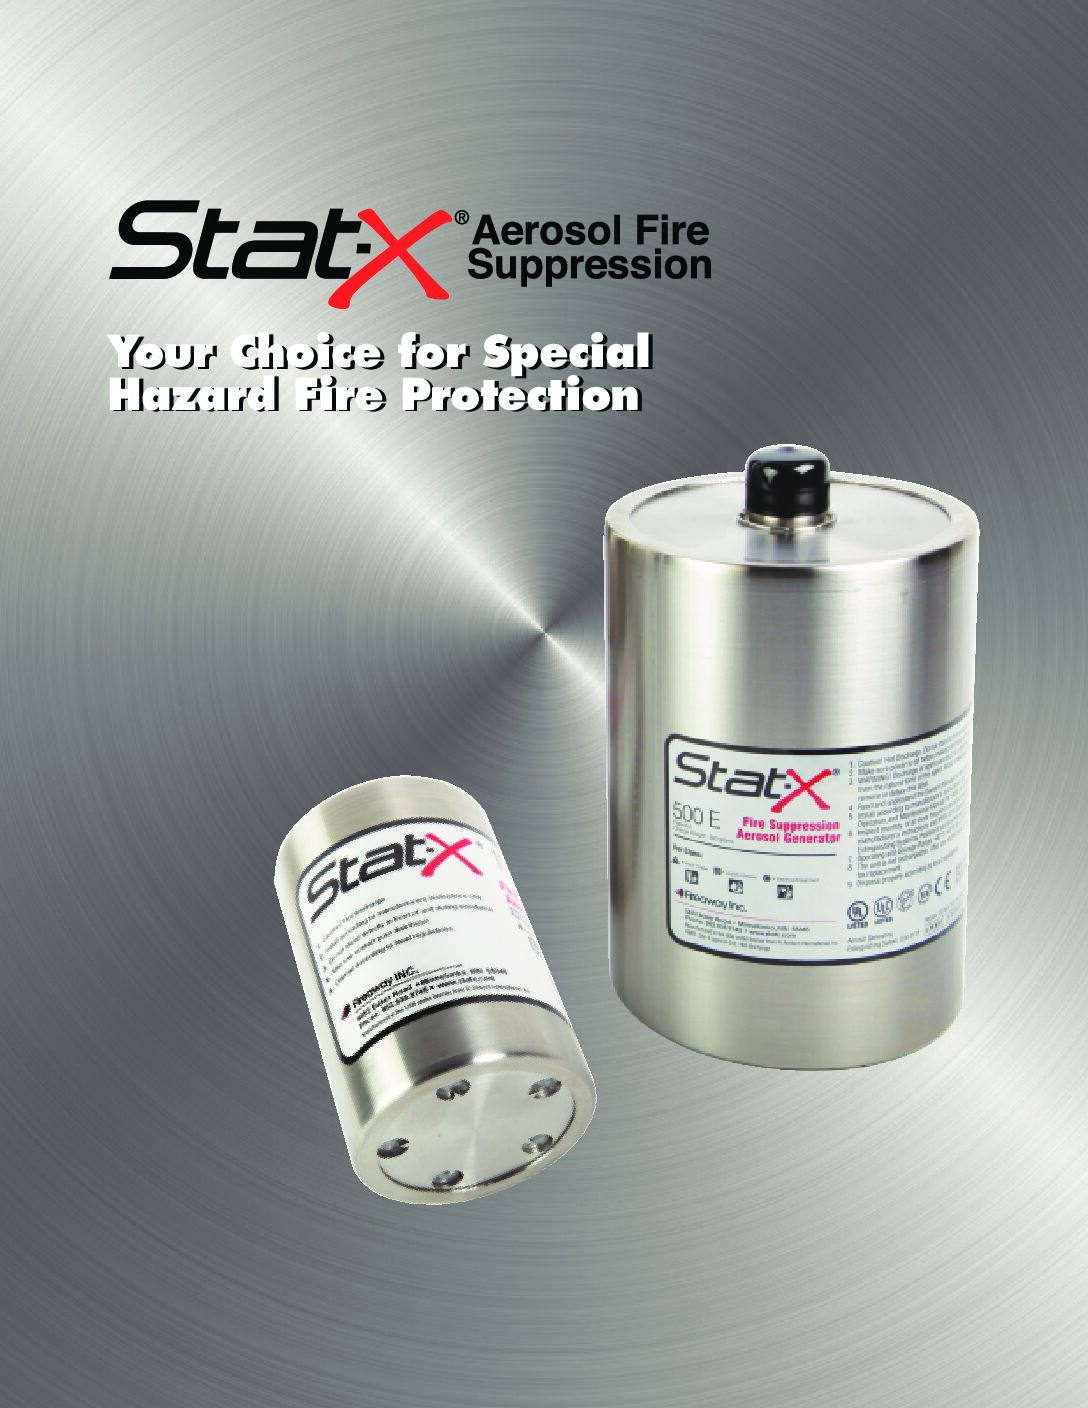 Stat-X®: Your Choice for Special Hazard Fire Protection